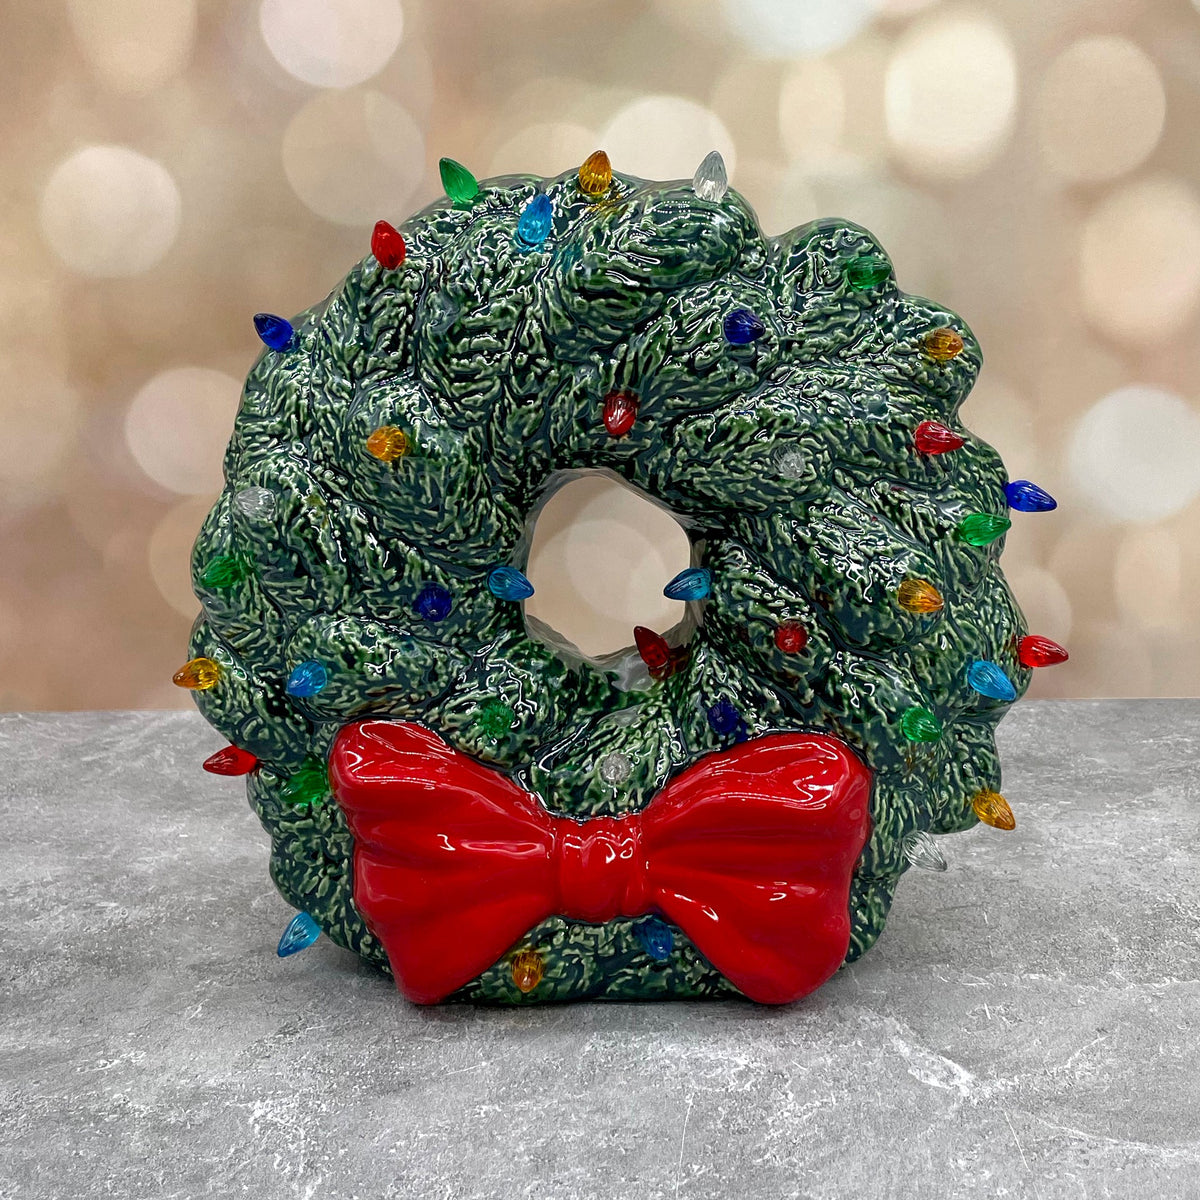 Vintage Light Up Wreath - Ready to Ship